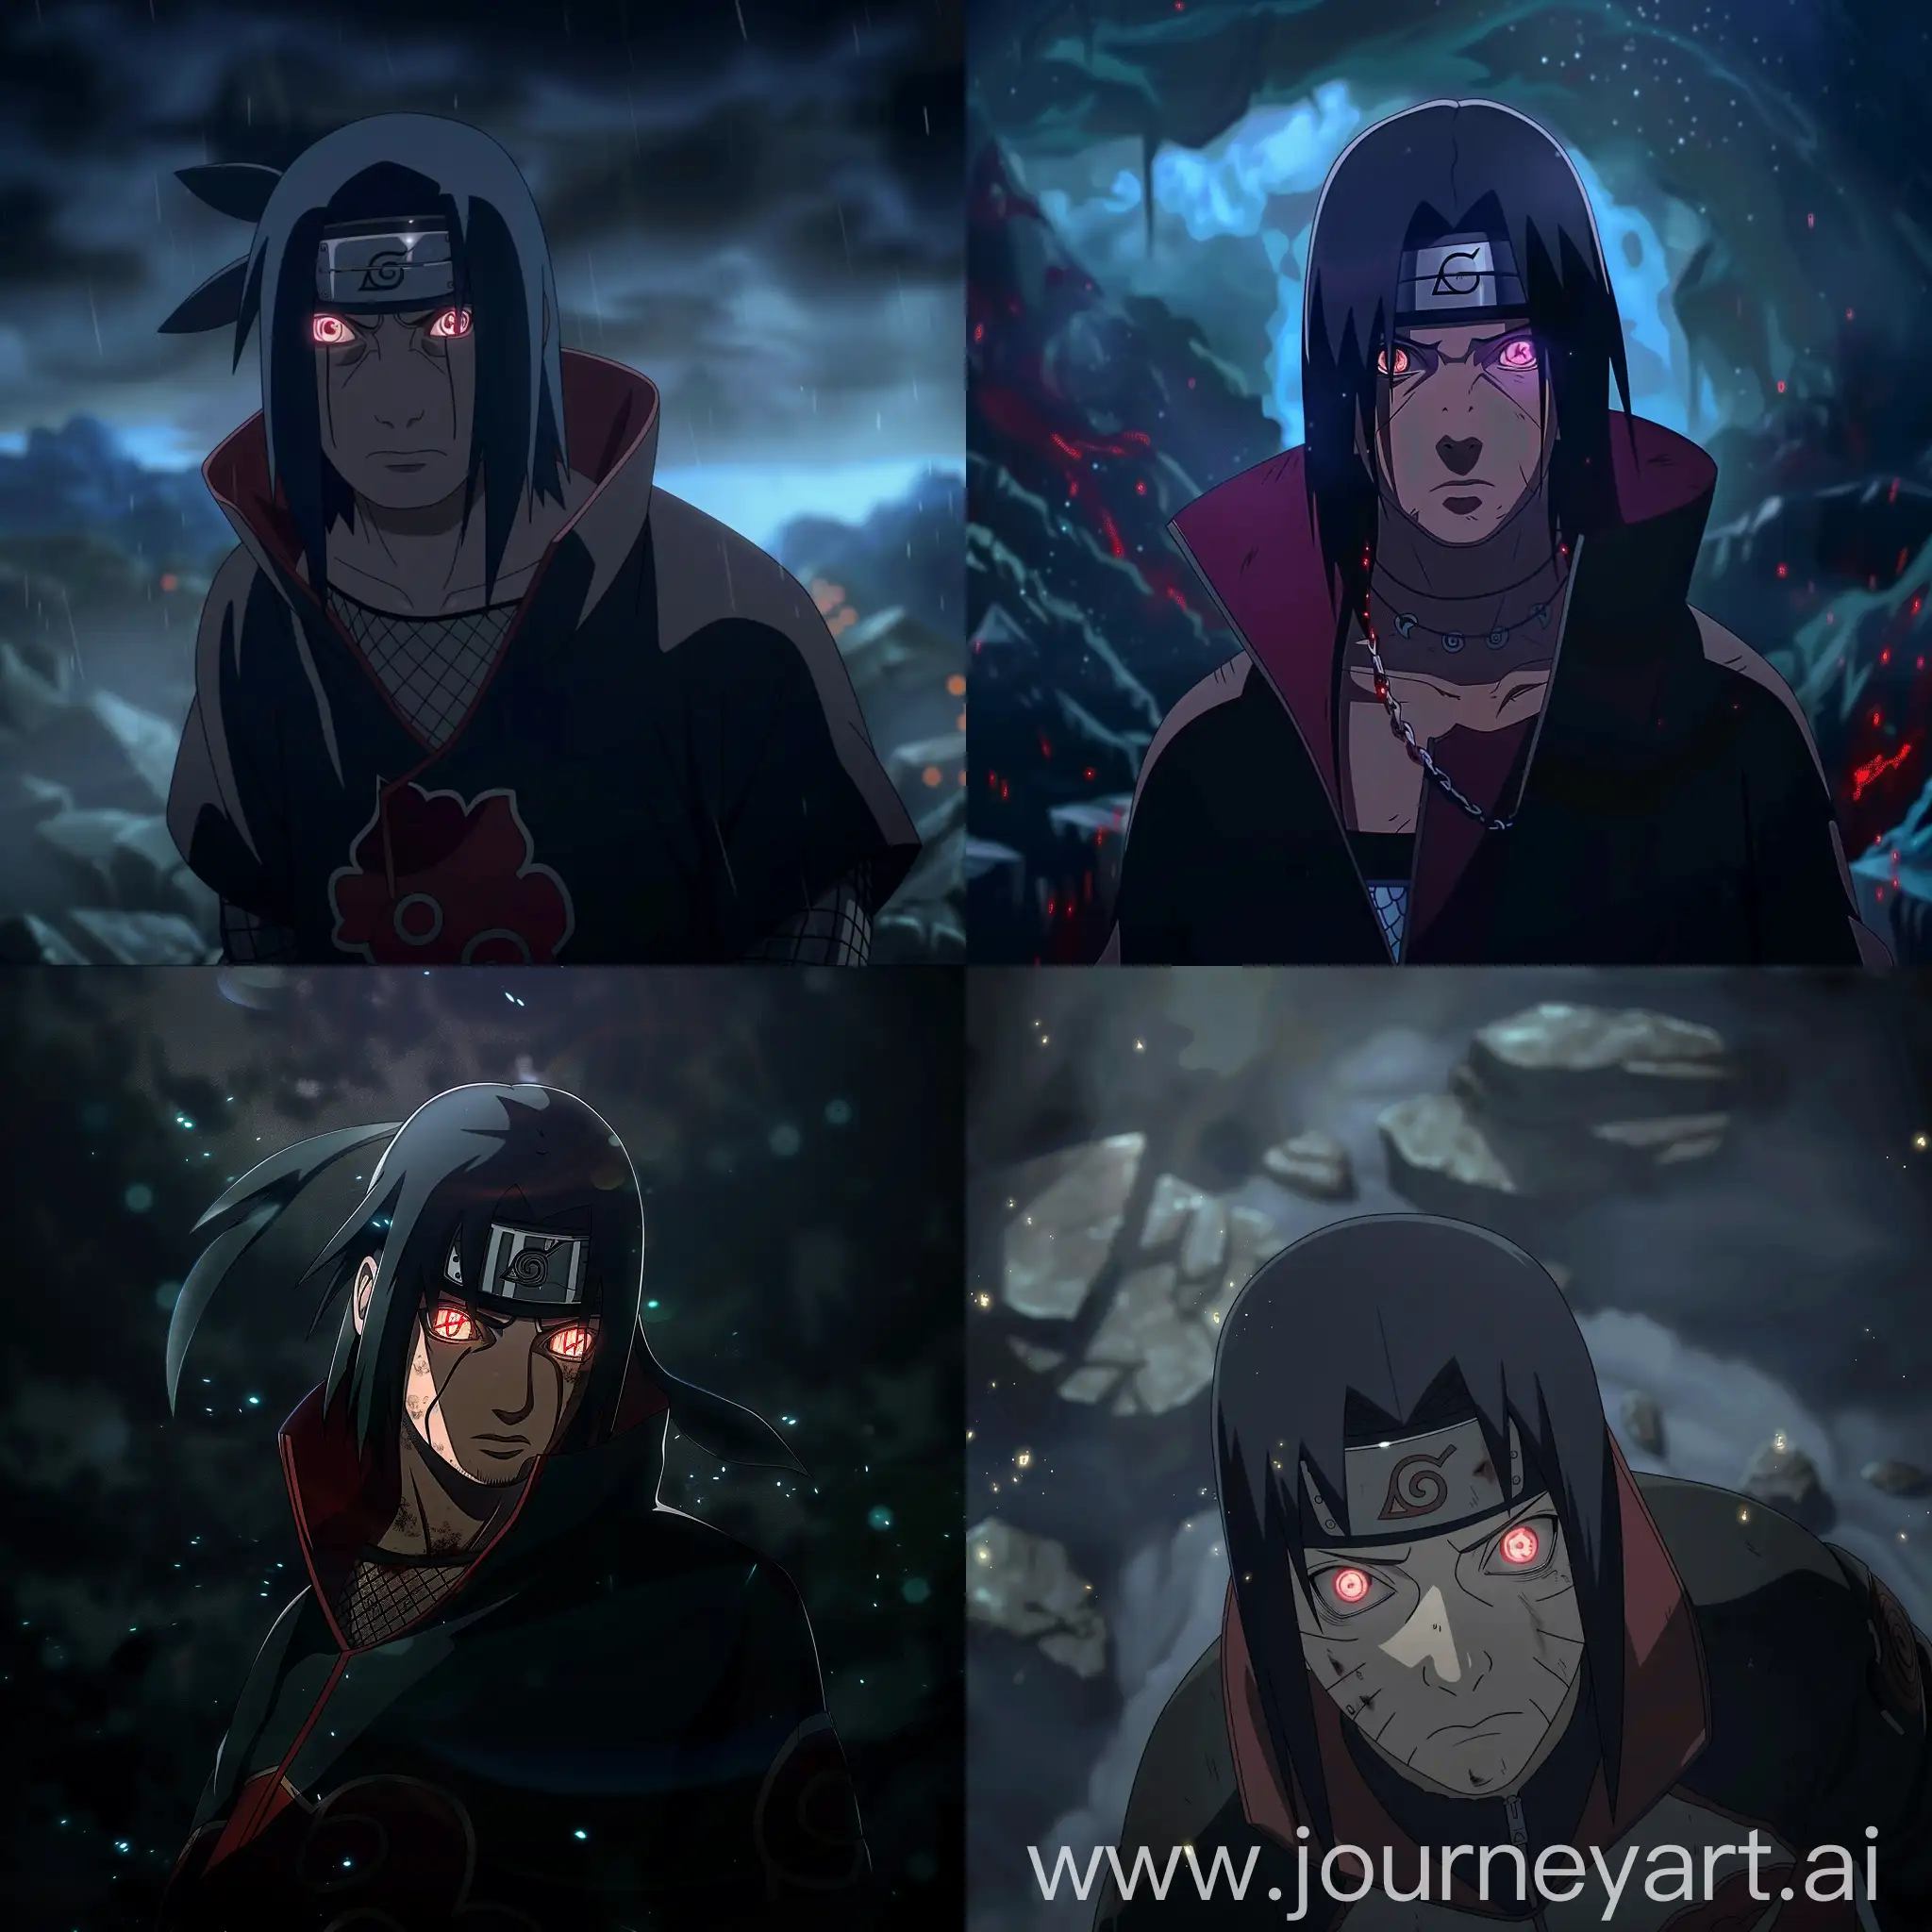 Itachi from the anime Naruto in a dark atmosphere with glowing eyes